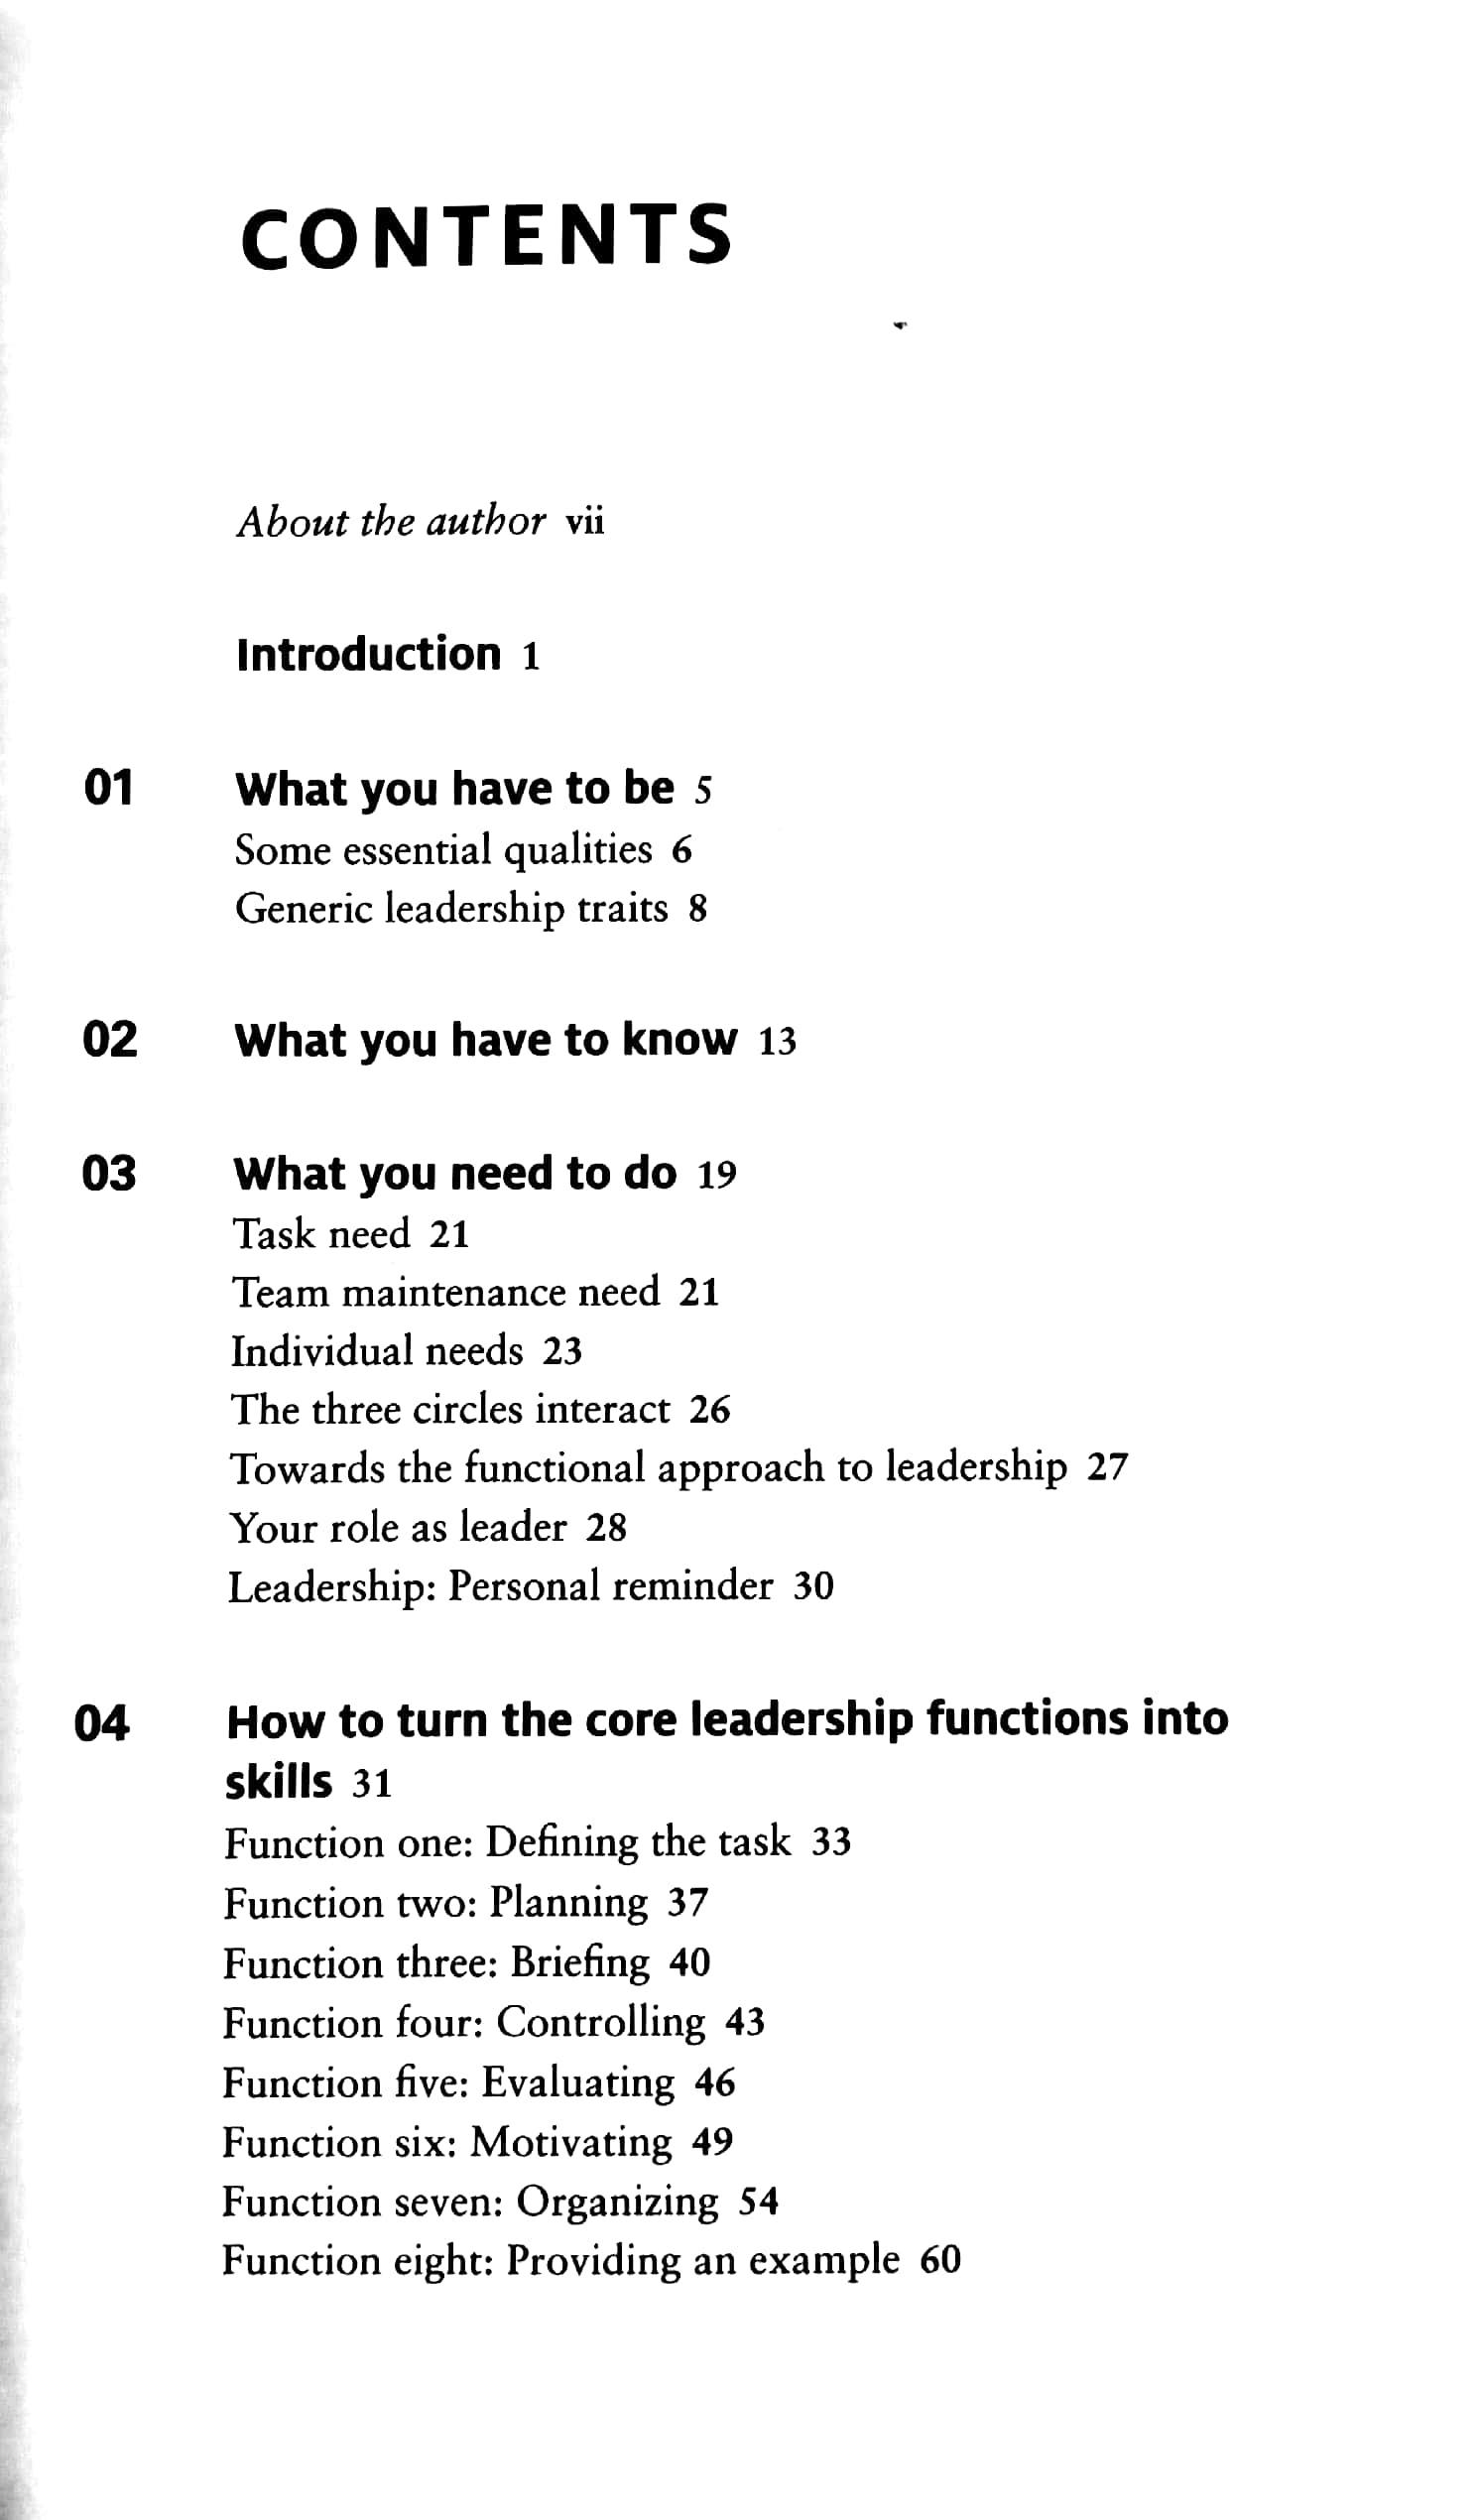 Develop Your Leadership Skills: Fast, Effective Ways To Become A Leader People Want To Follow